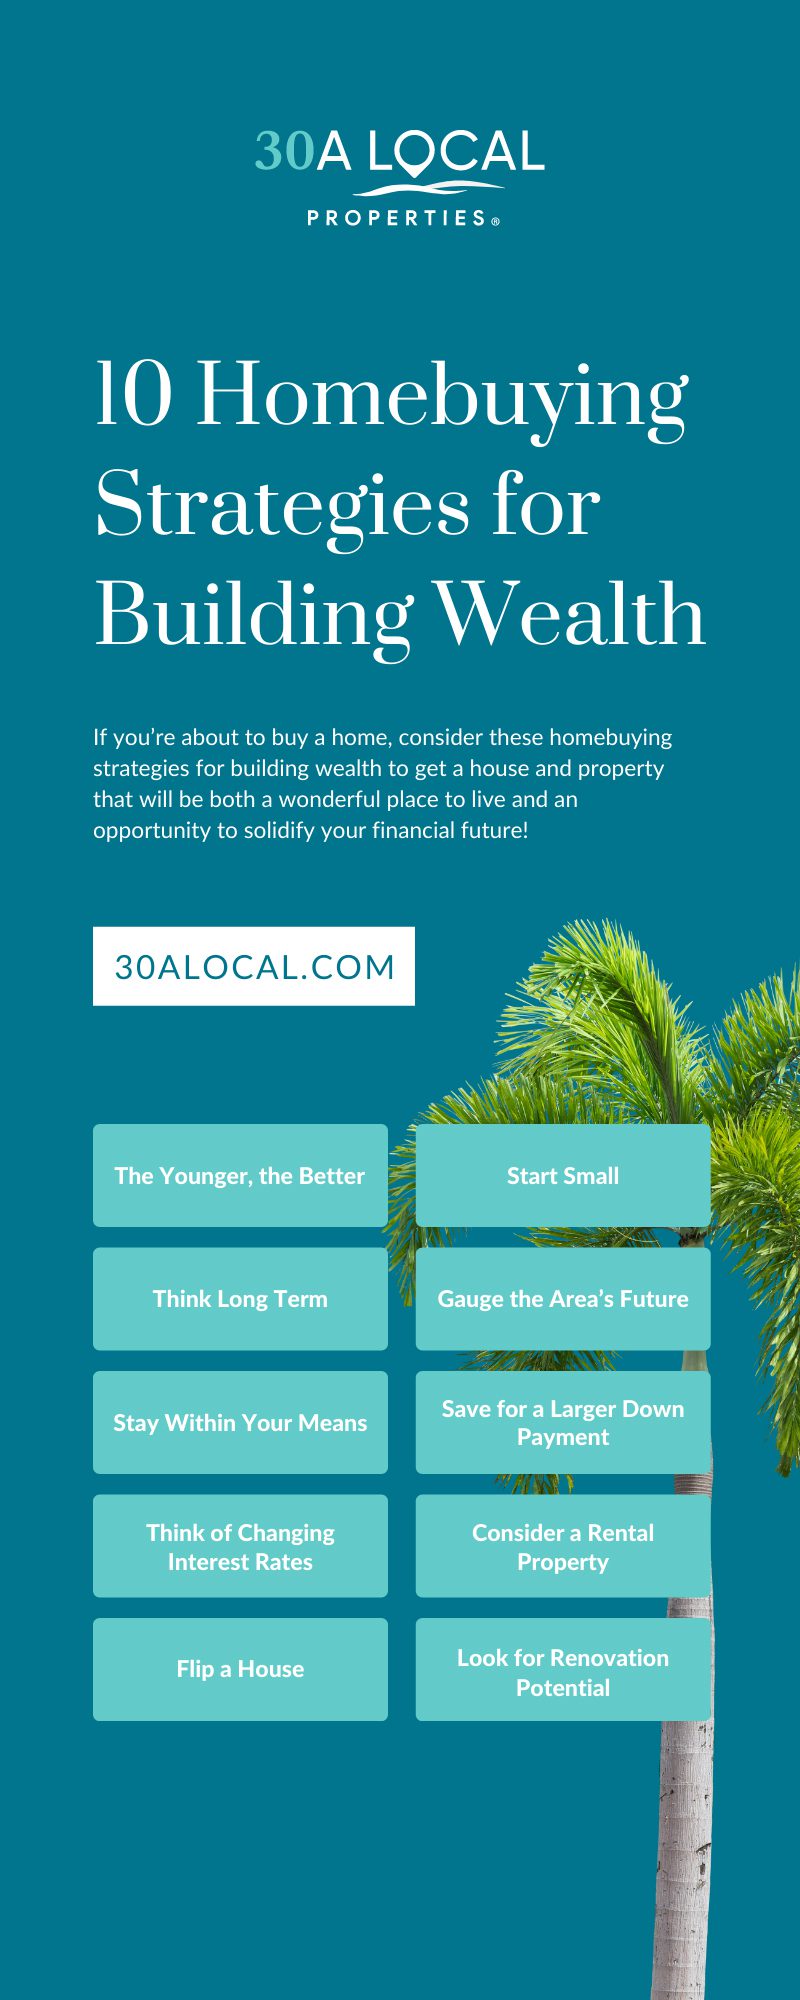 10 Homebuying Strategies for Building Wealth 